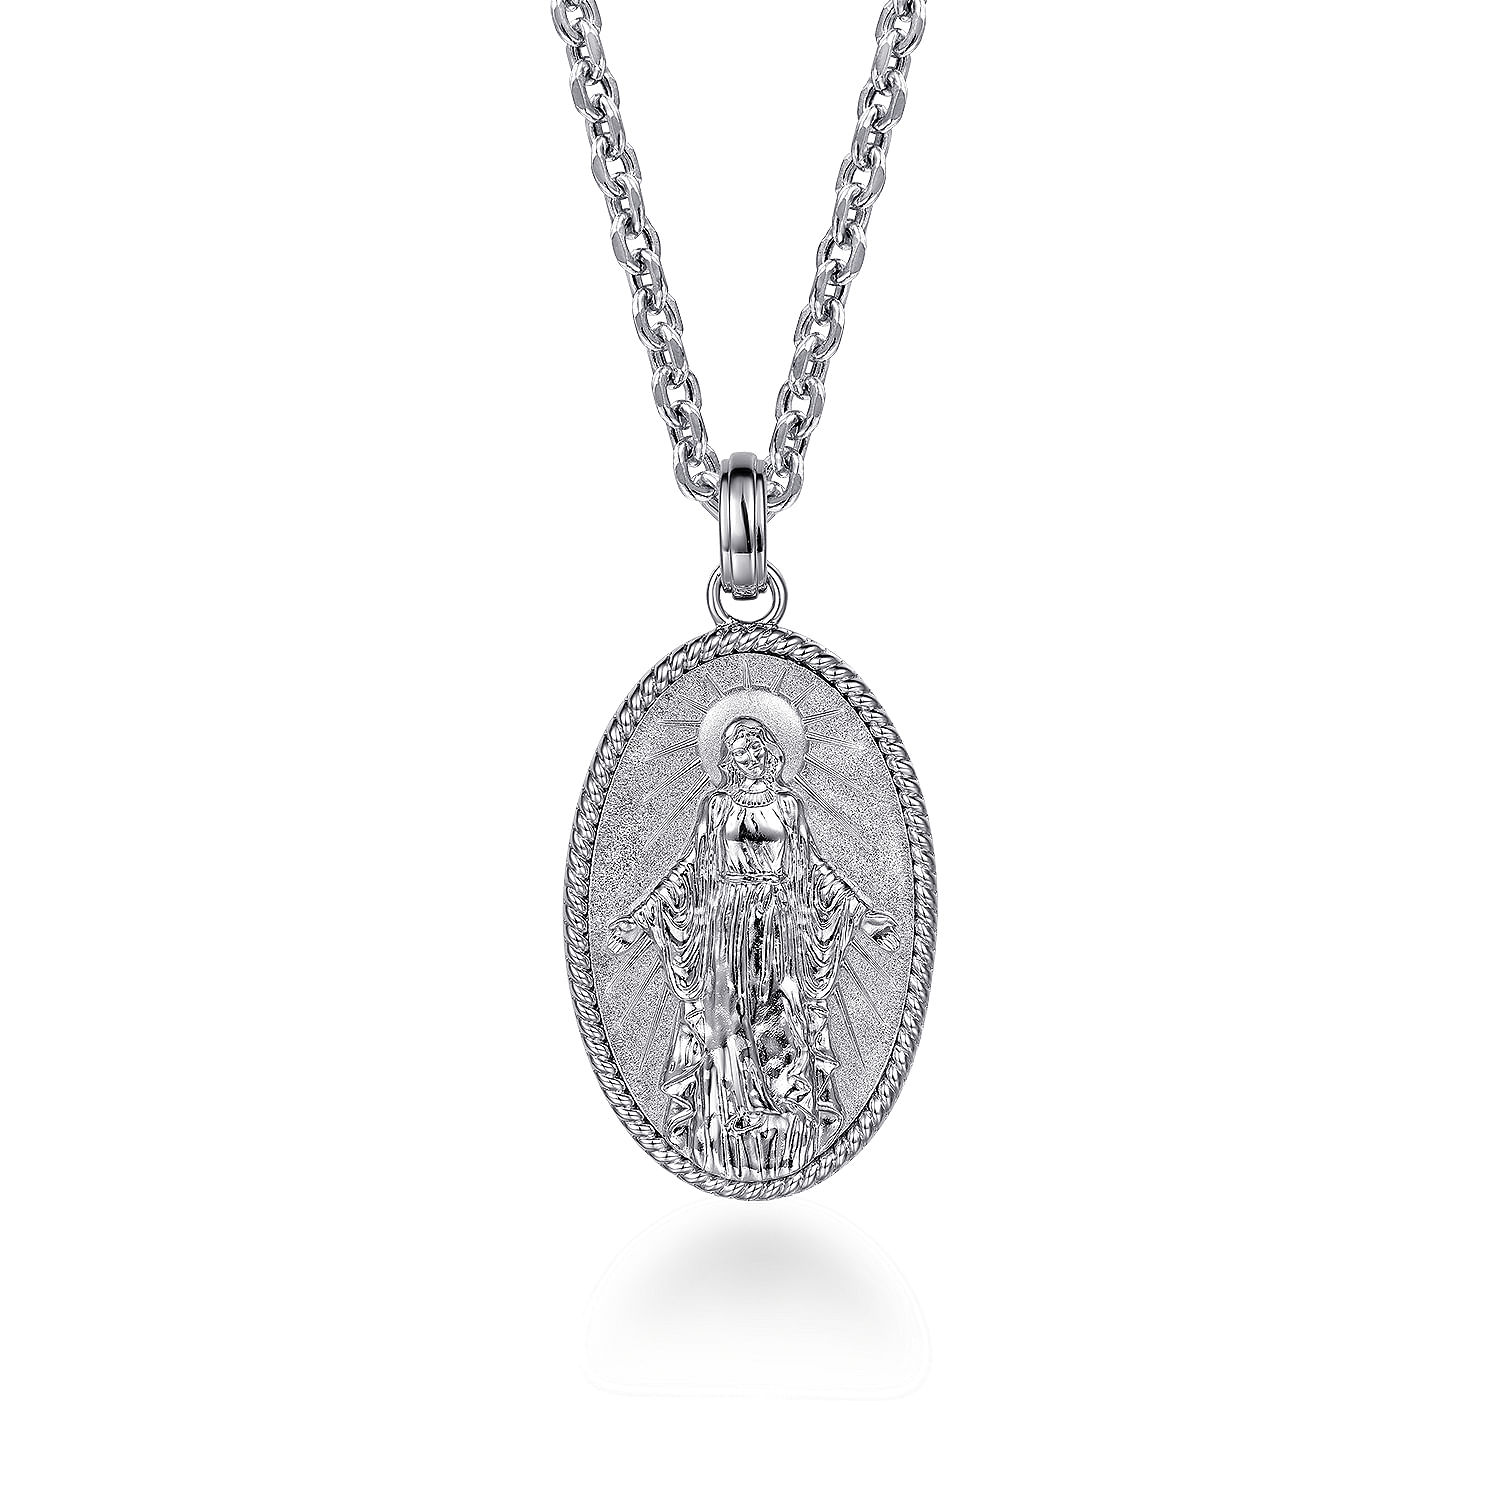 Oval 925 Sterling Silver Virgin Mary Pendant with Twisted Rope Frame